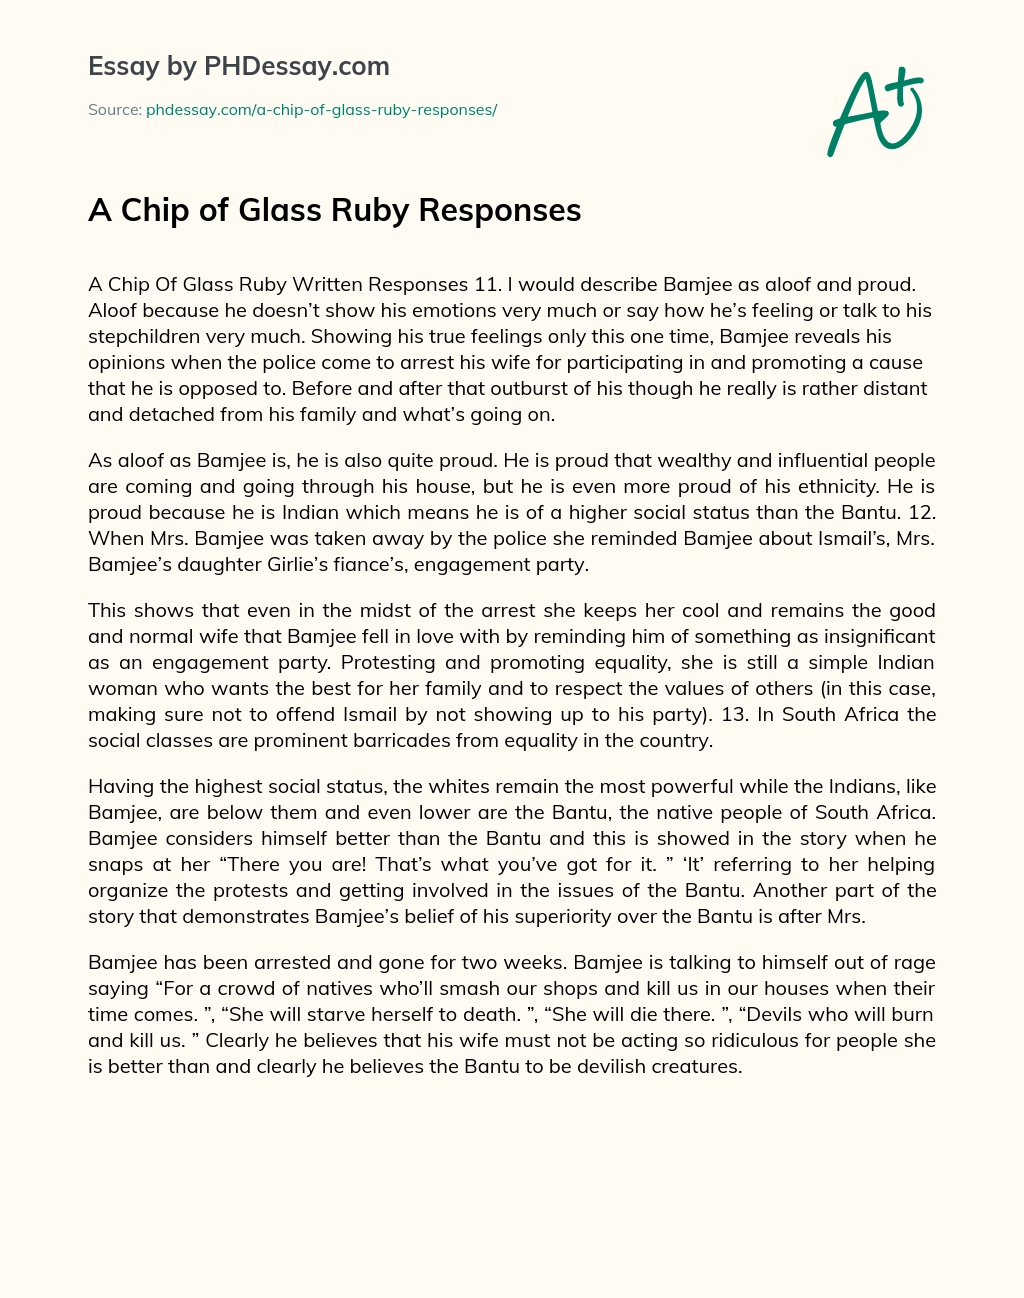 A Chip of Glass Ruby Responses essay